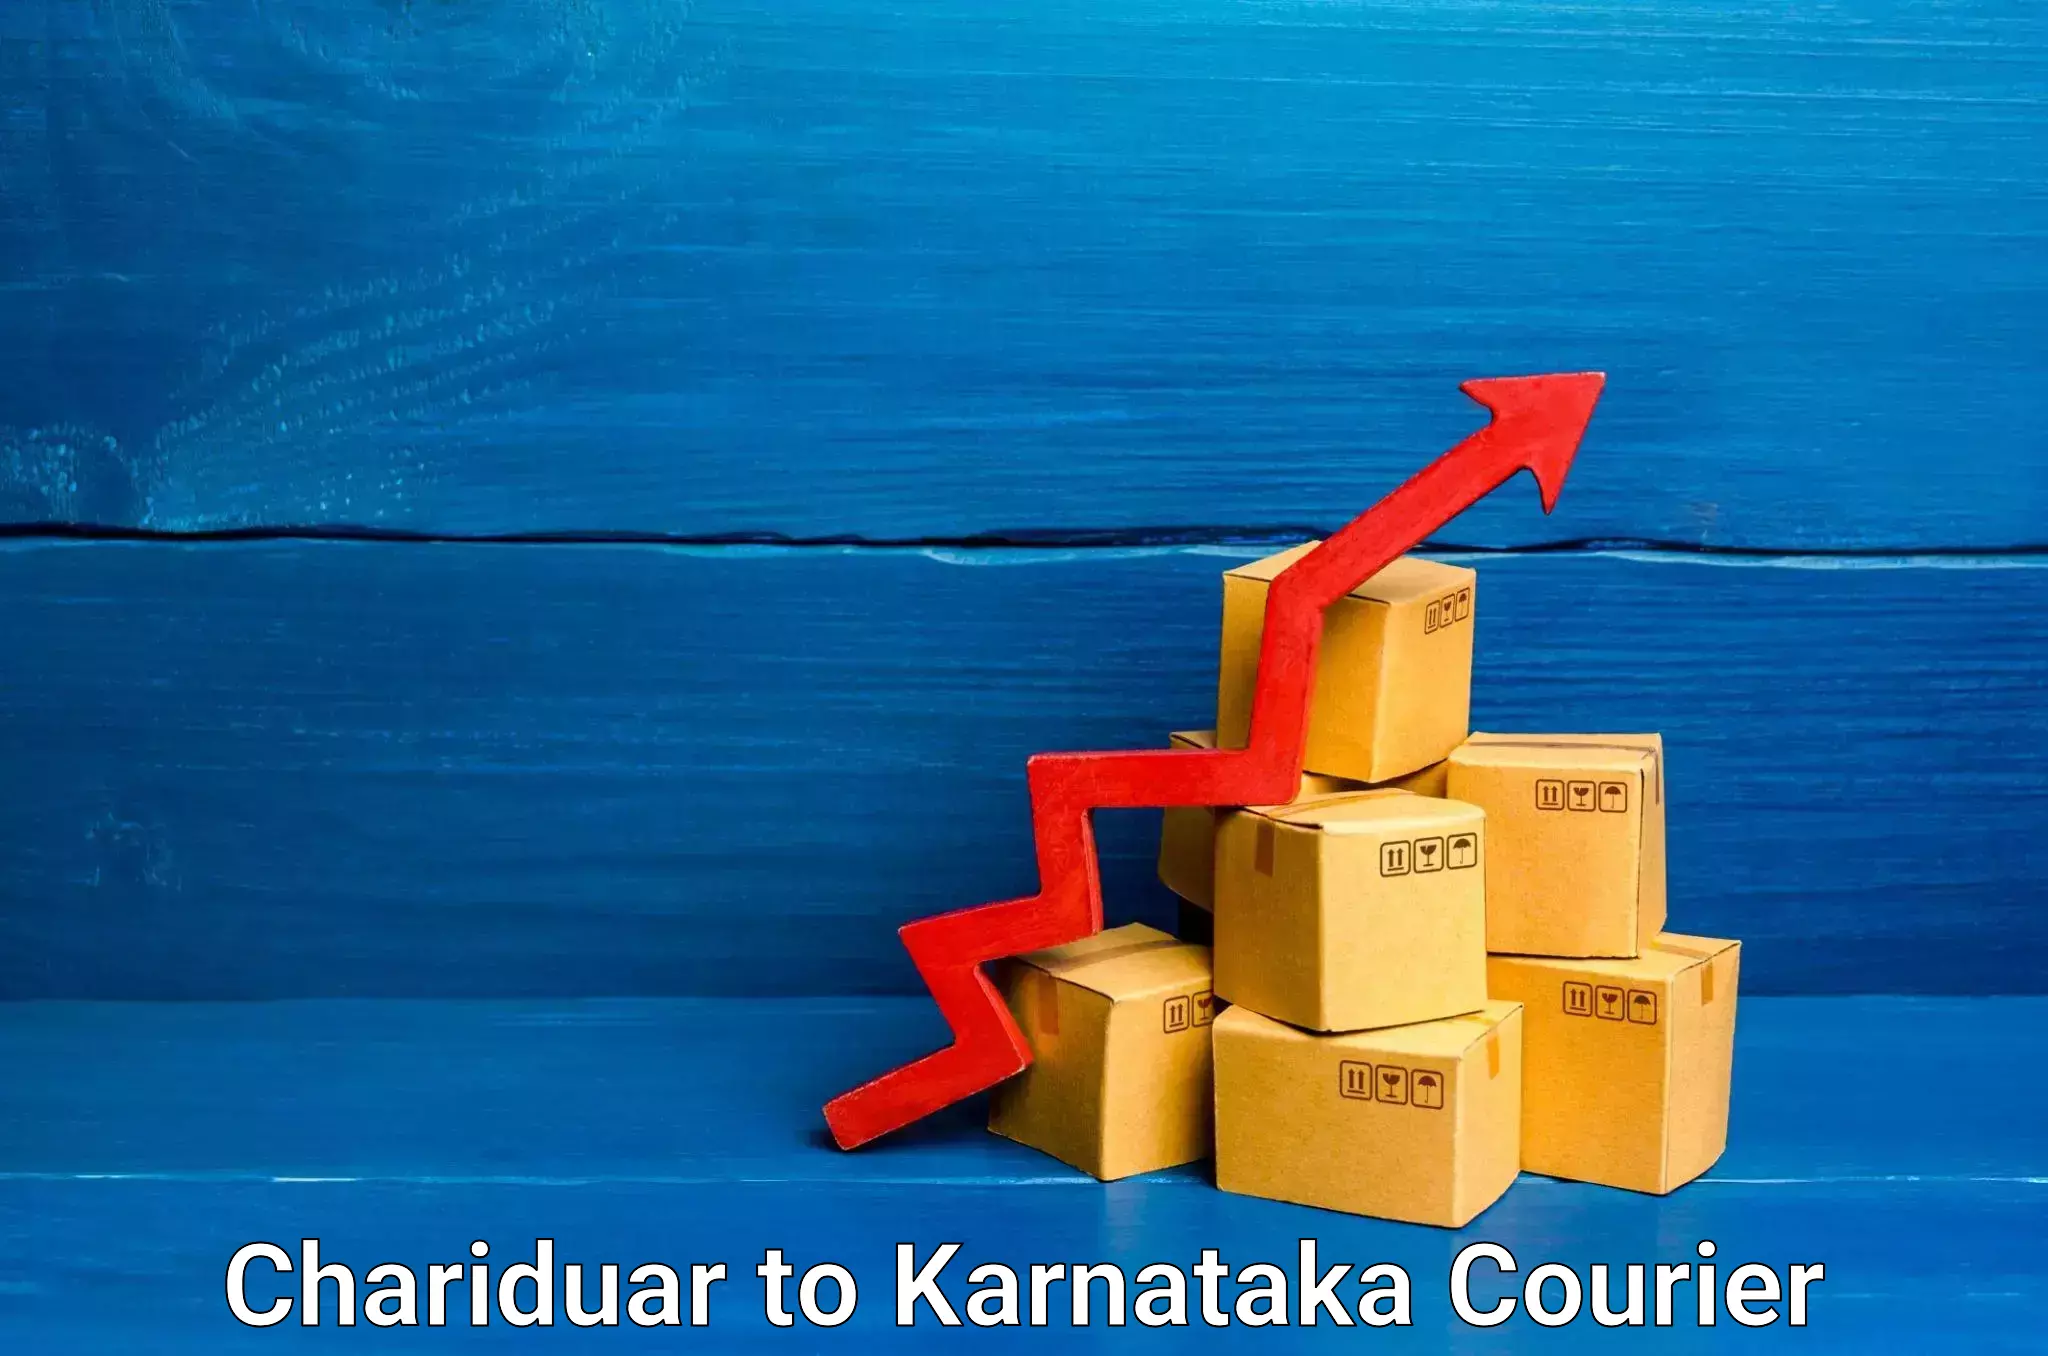 State-of-the-art courier technology Chariduar to IIT Dharwad